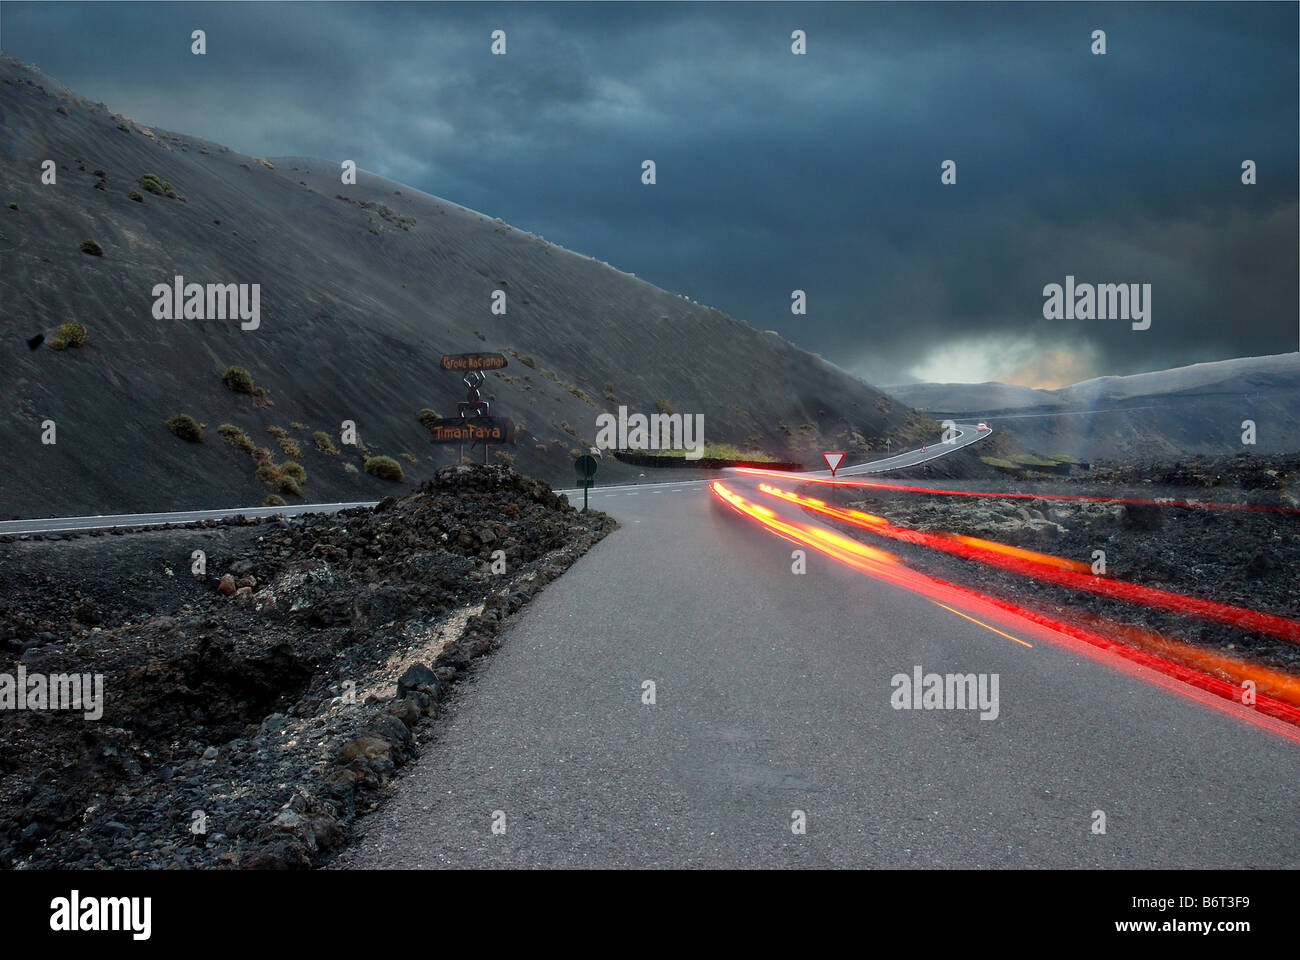 Road and light trail. Timanfaya National Park. Lanzarote Island. Canary Islands. Spain. Stock Photo